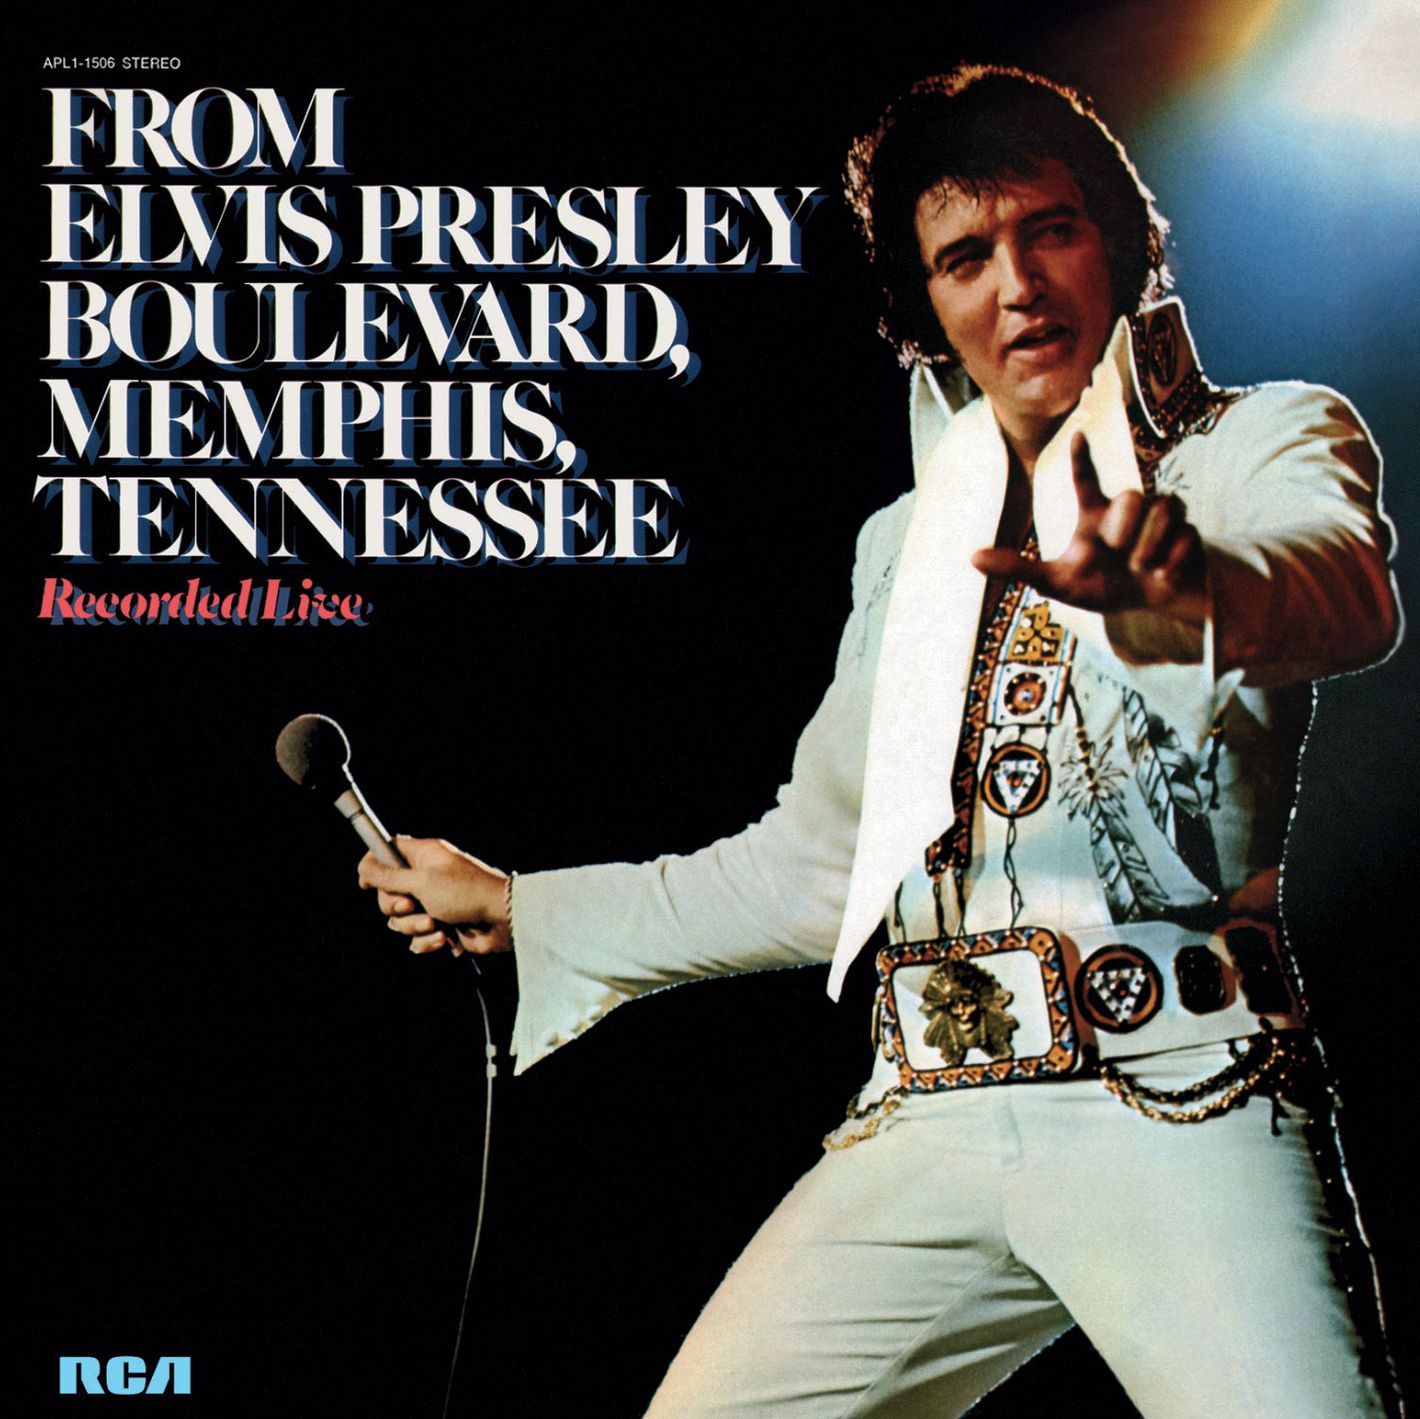 All 57 Elvis Presley Albums Ranked From Worst To Best